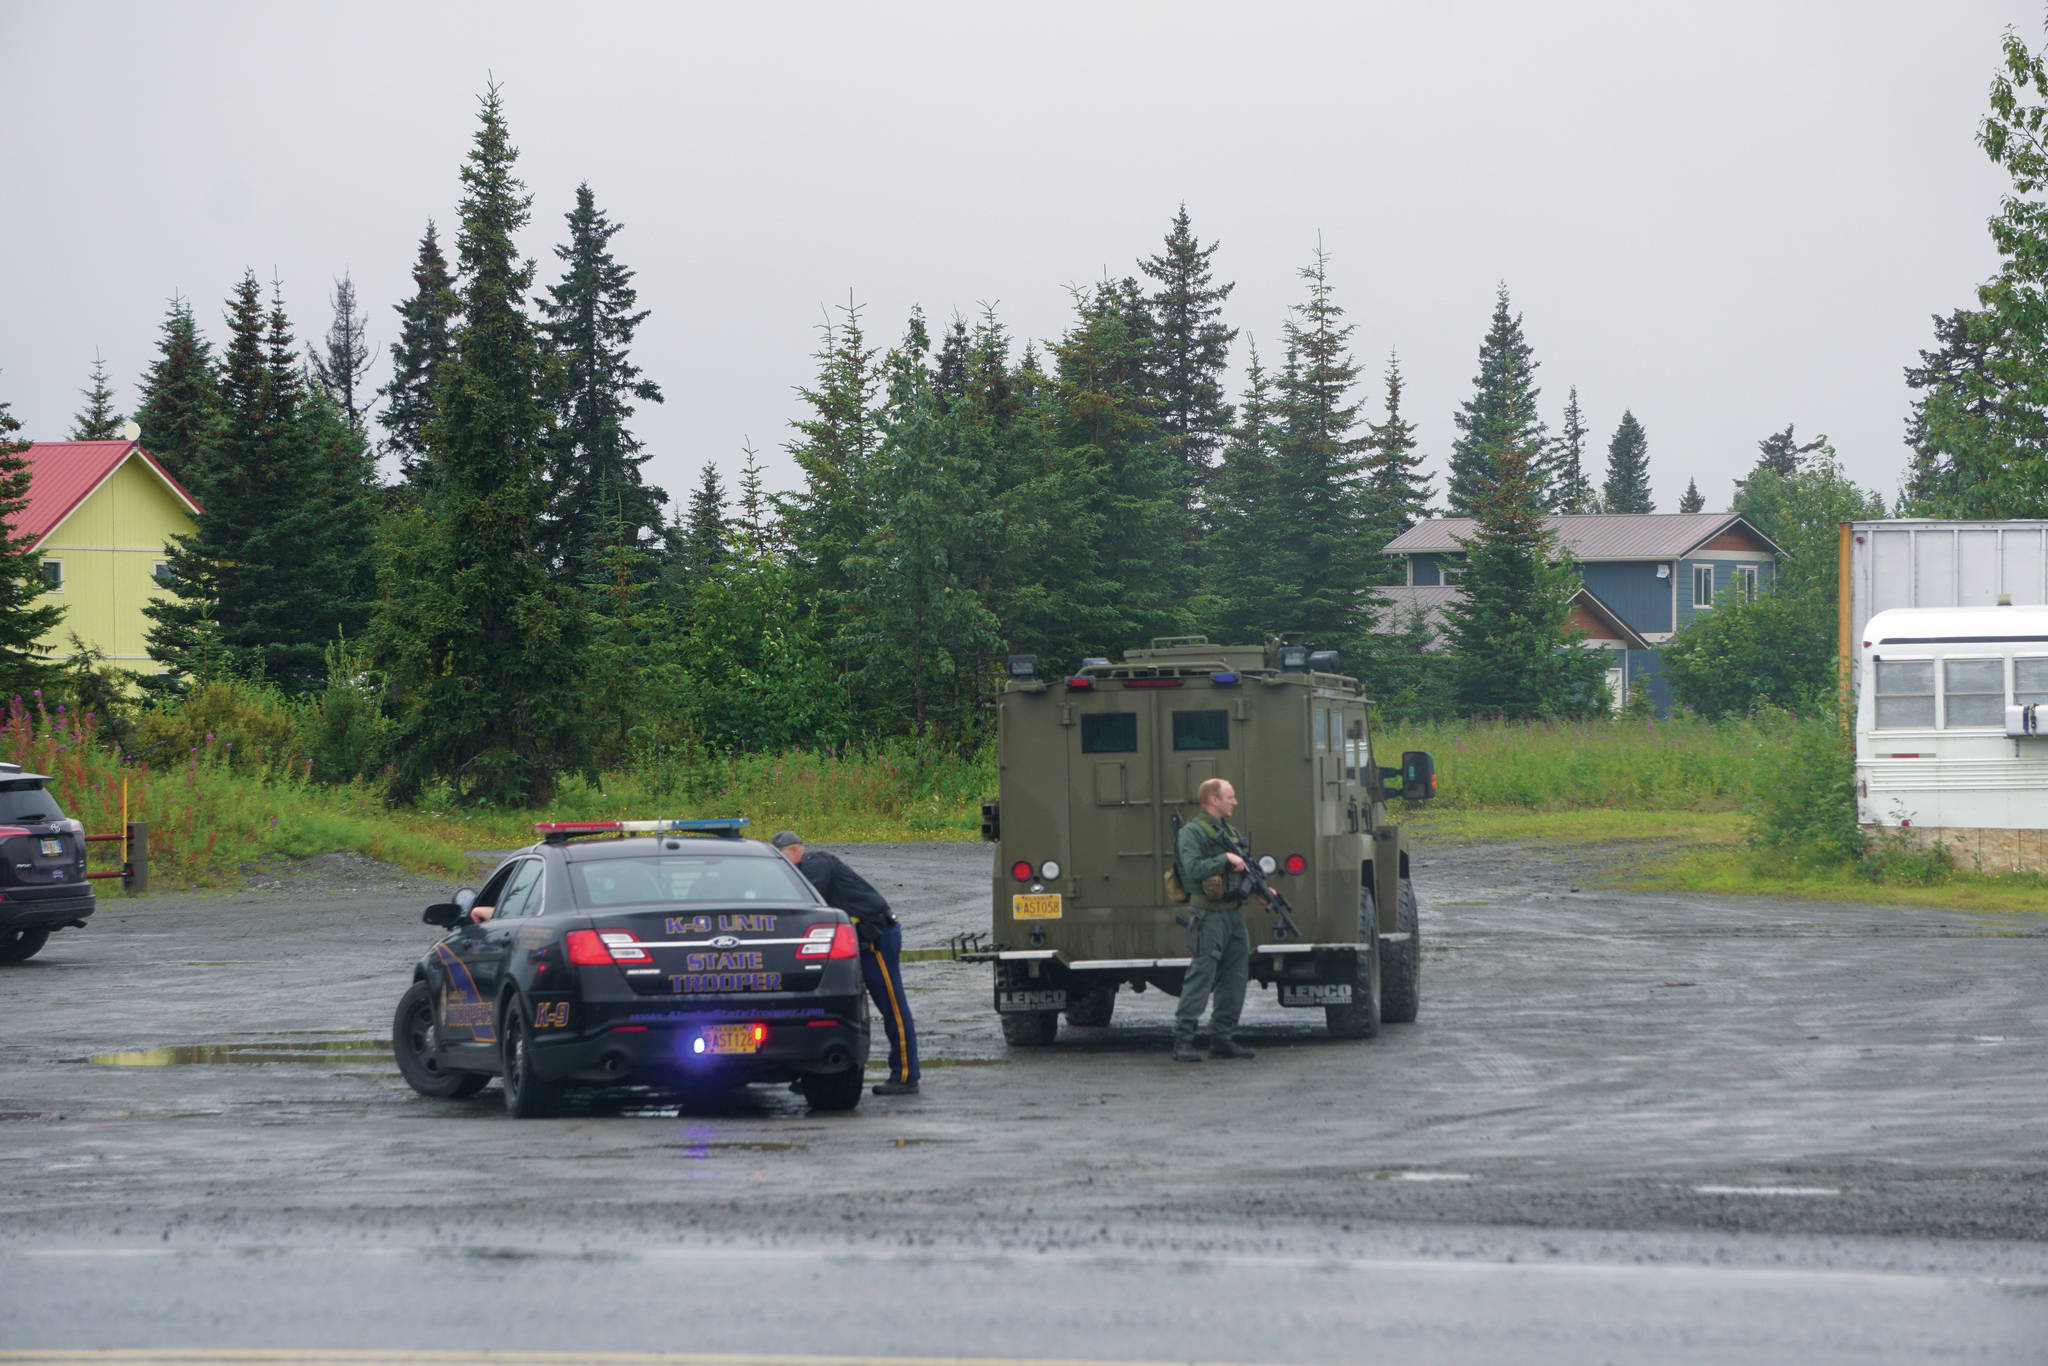 Photo by Michael Armstrong/Homer News 
Alaska State Troopers and members of the Special Emergency Reaction Team respond at a shooting scene on Monday, Aug. 23, 2021, at the Anchor Point Warehouse in Anchor Point, Alaska, on the Sterling Highway. An Alaska State Trooper was shot and is in fair condition at an Anchorage hospital. Troopers arrested the suspect, Bret Herrick, 60, on Tuesday morning, Aug. 24, 2021.